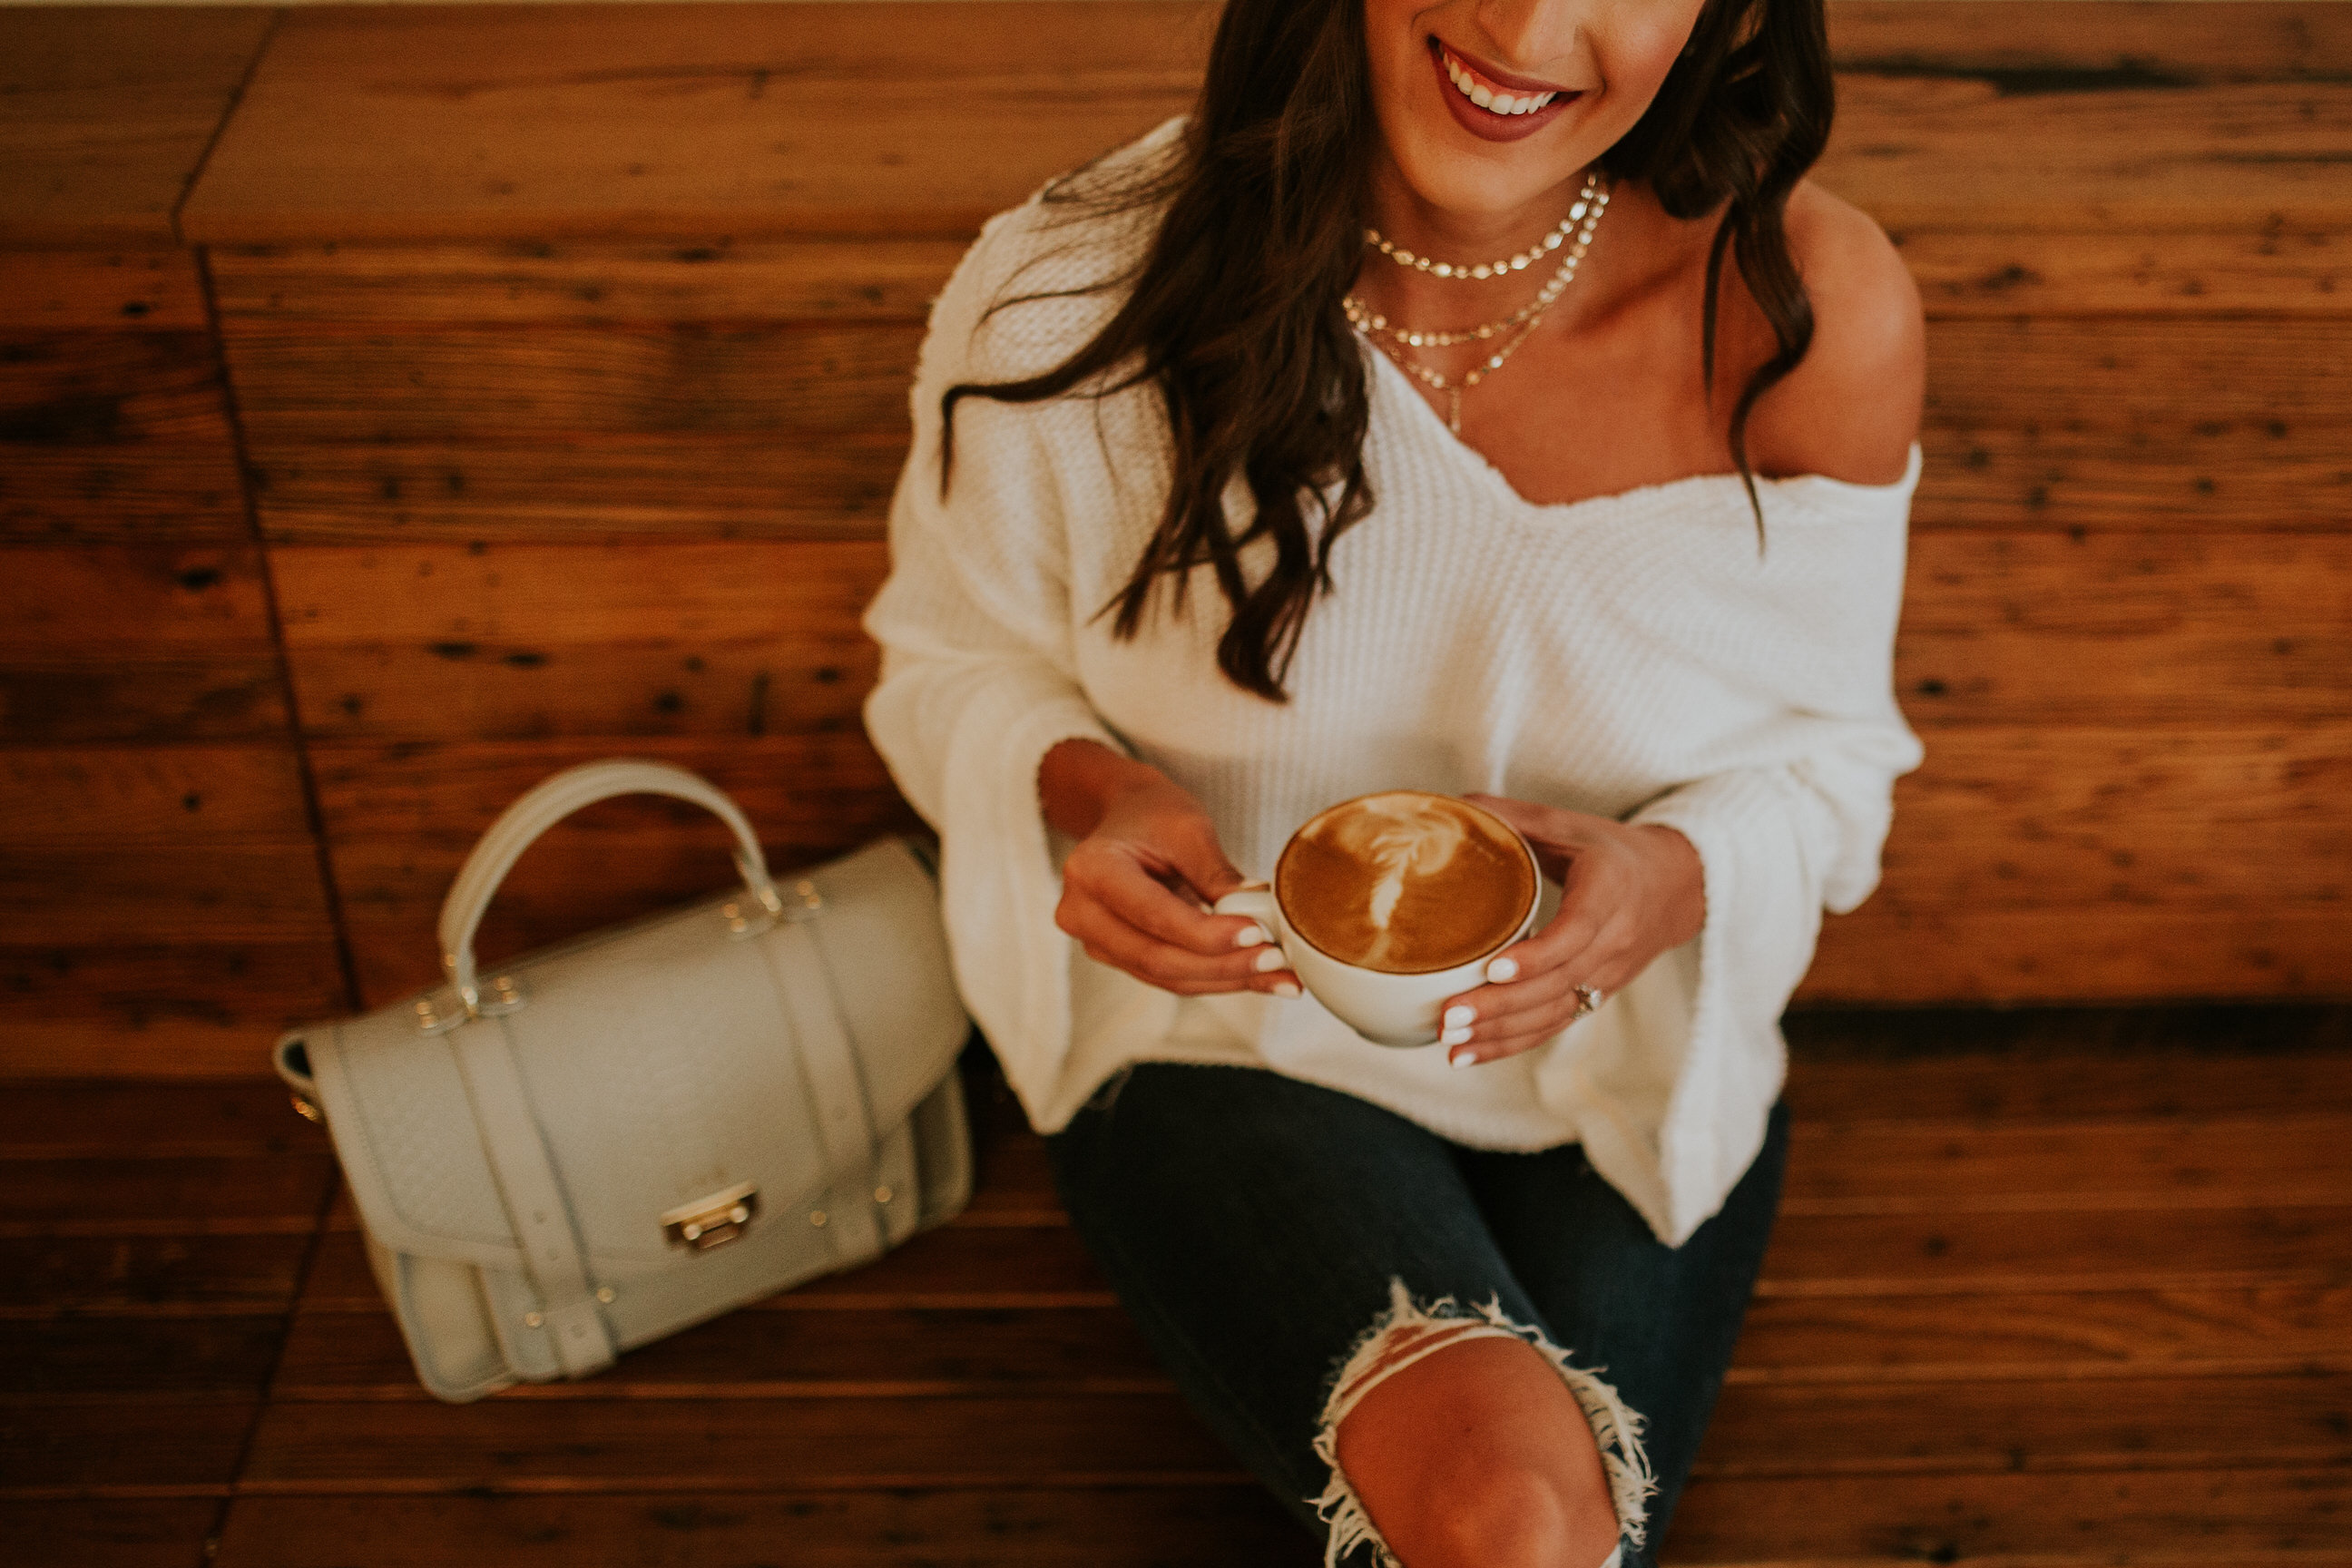 coffee shop outfit, thermal top, off the shoulder top, cozy style, cozy outfit ideas, cozy fashion, atlantic no 5 louisville ky, louisville coffee shops, baublebar y chain necklace, gold layered necklaces, levis denim, levis distressed jeans // grace a southern drawl 